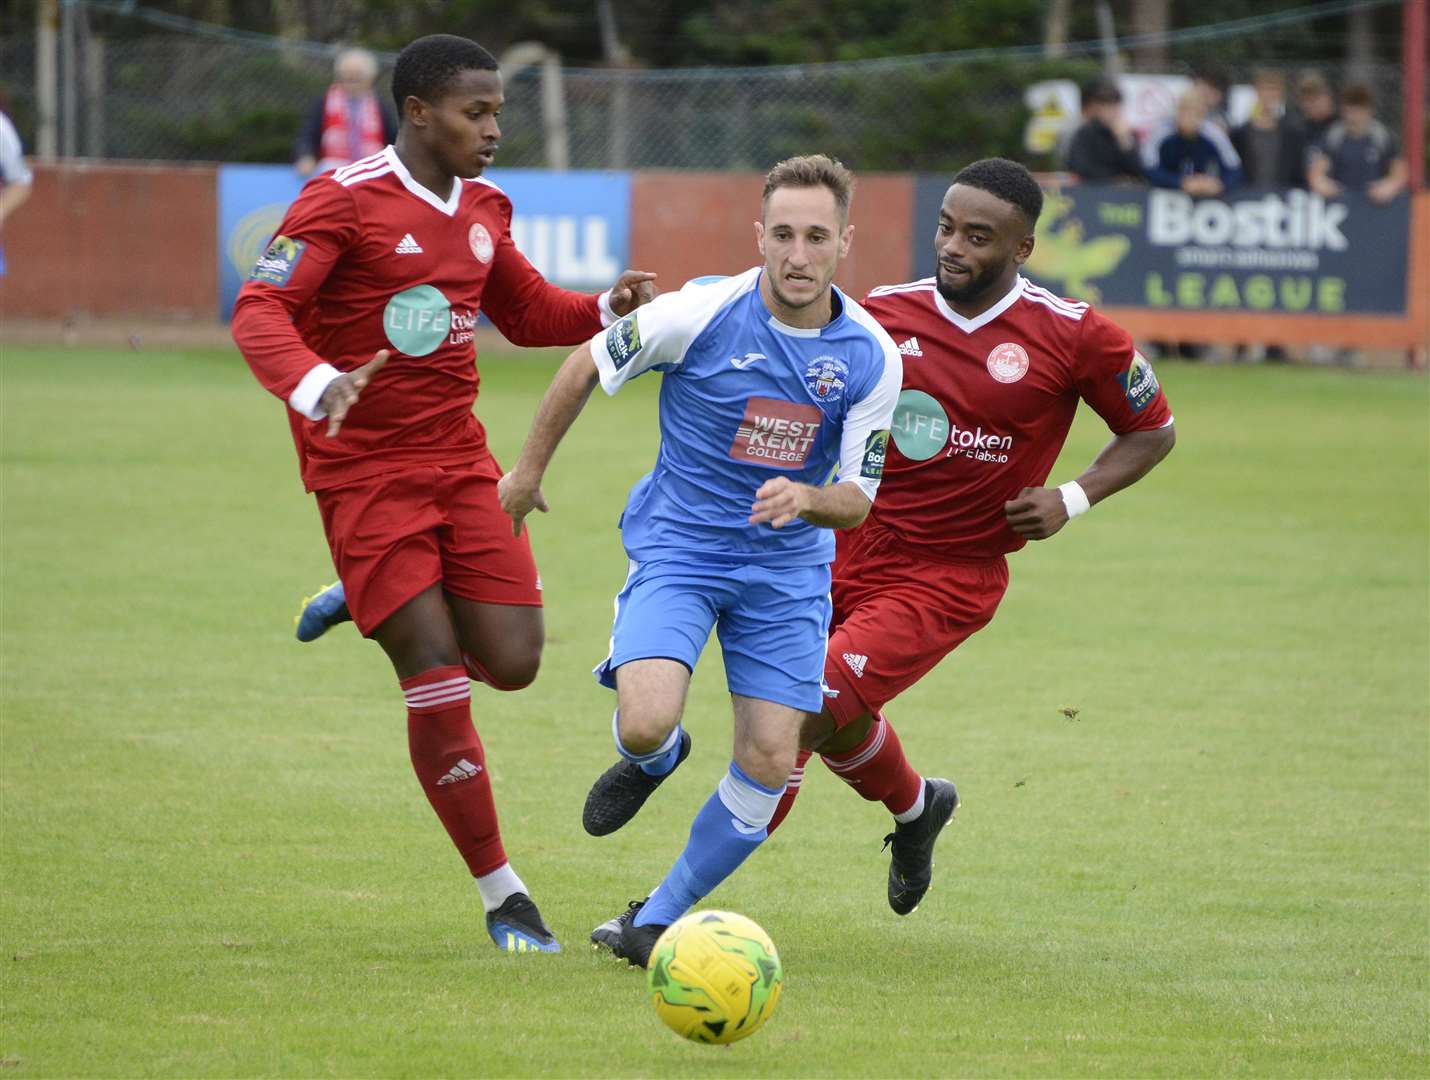 Tonbridge (blue) on their way to a 2-0 win at Hythe Picture: Paul Amos